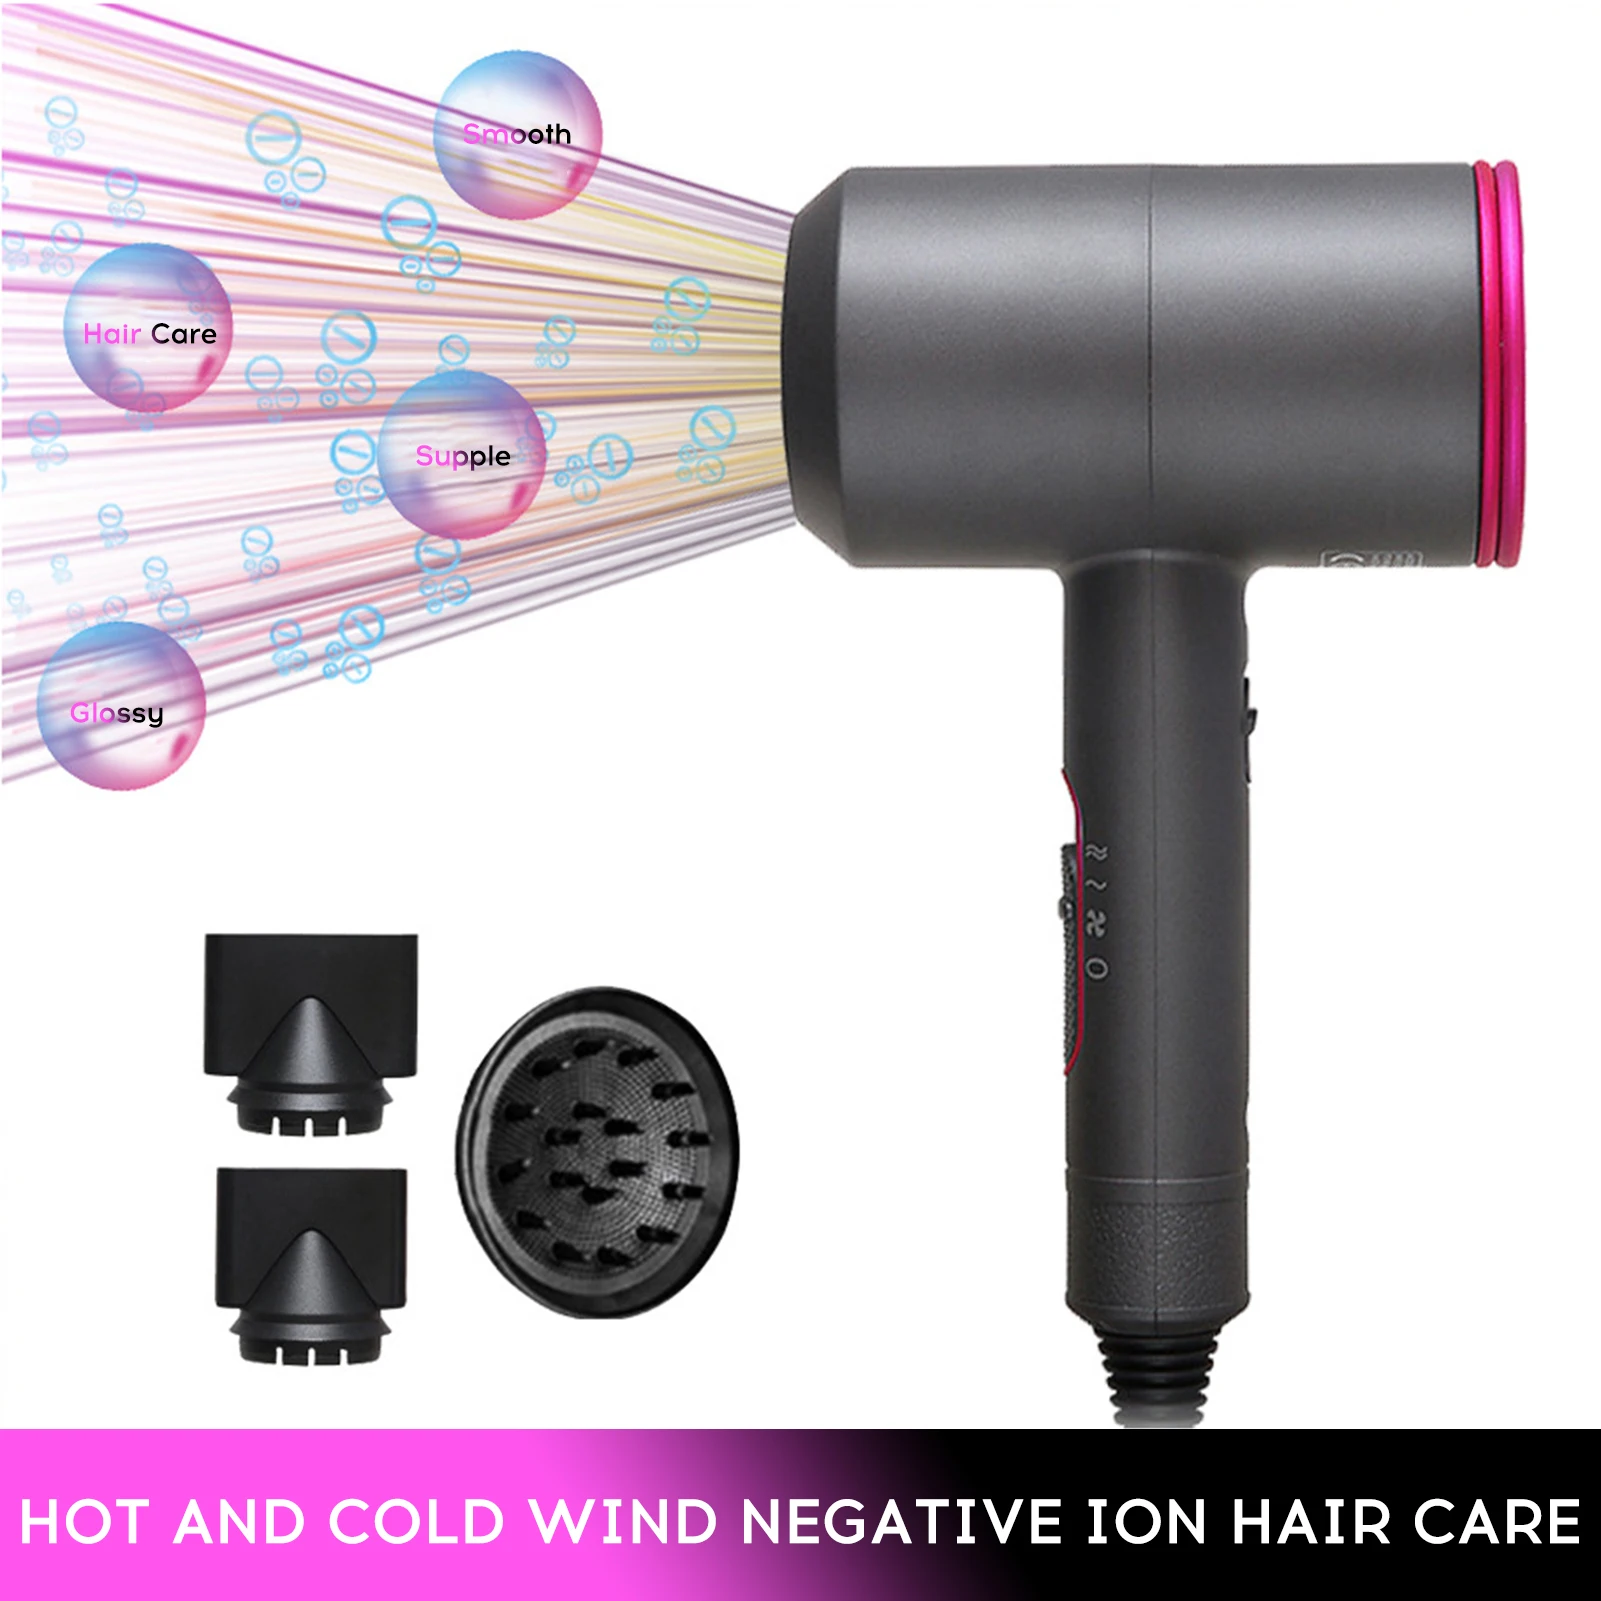 

Professional Hair Dryer Negative Ion Unfolded Hair Dryers Cold Hot Wind Blow Drier 5 Speed Quickly Dry Diffuser for Hair Dryer